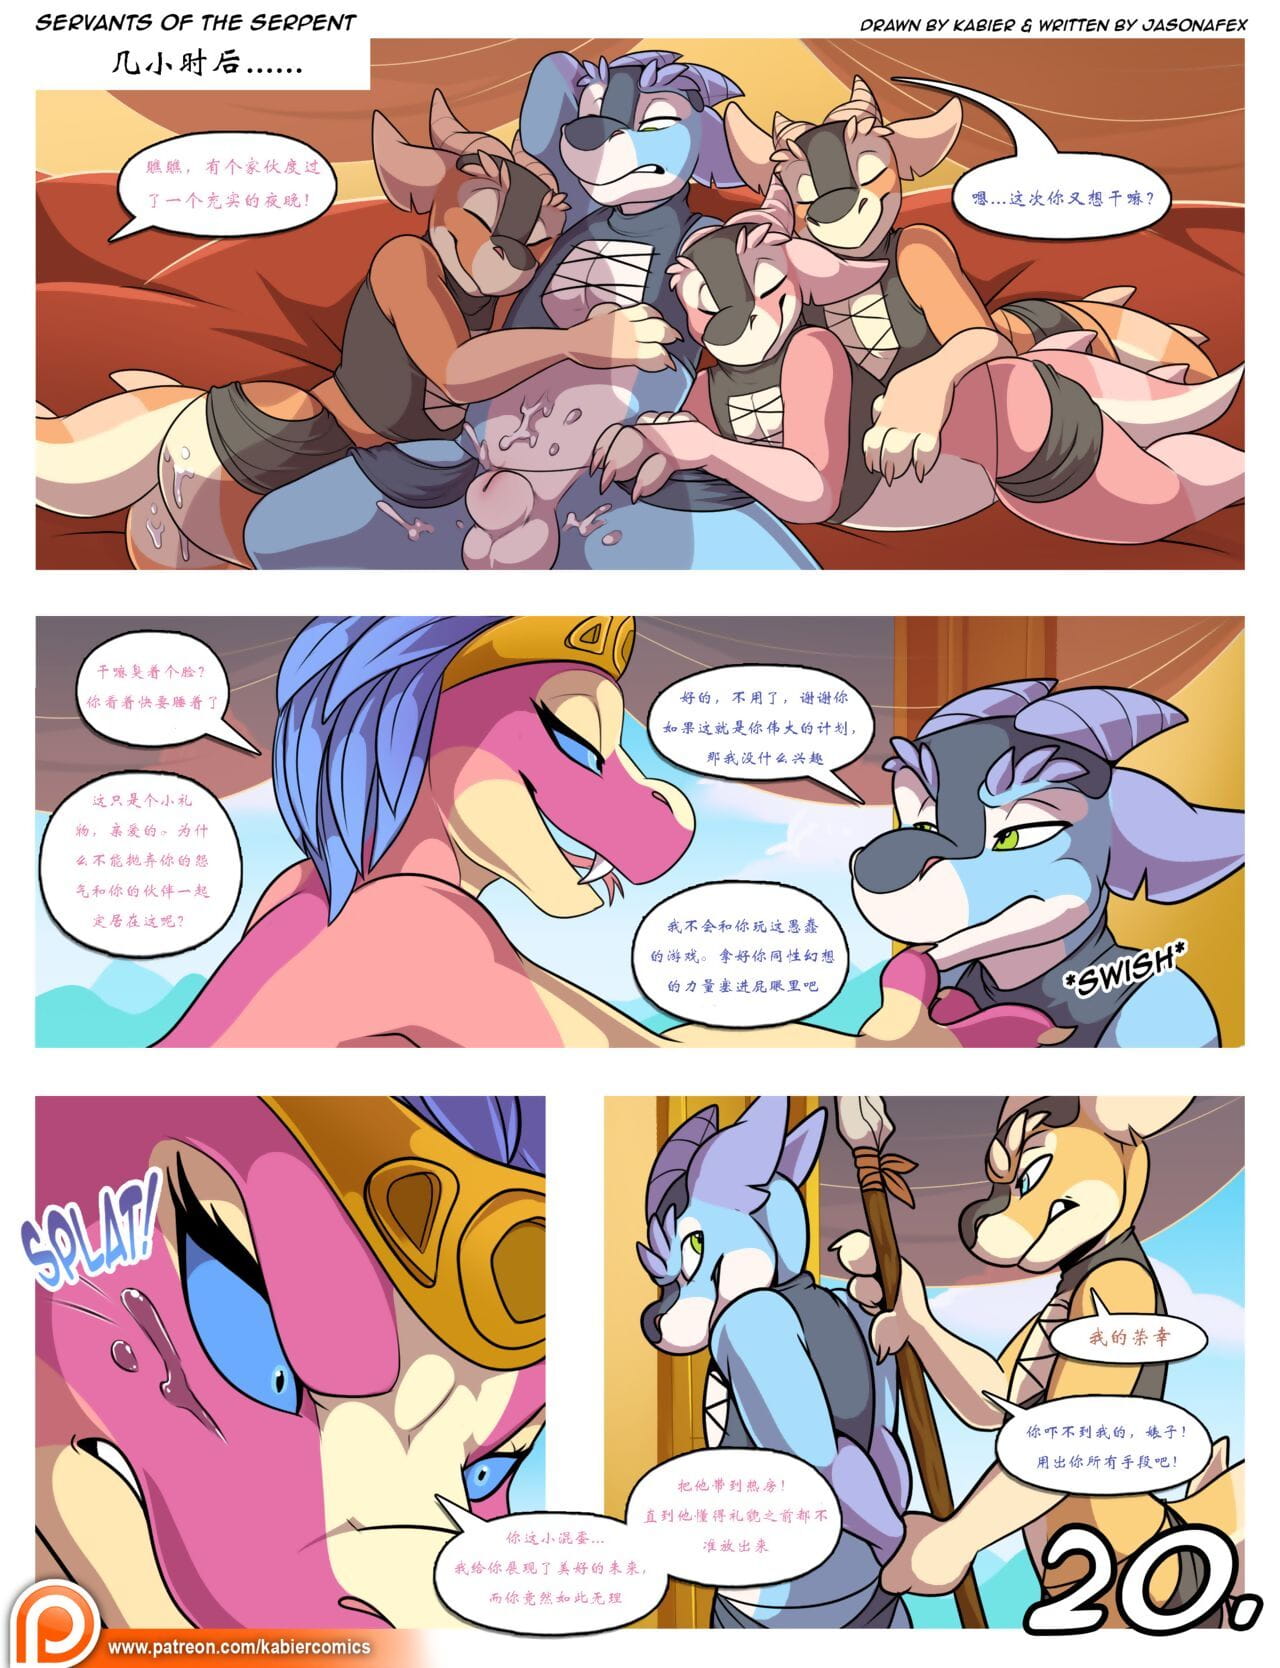 Servants of the Serpent page 1